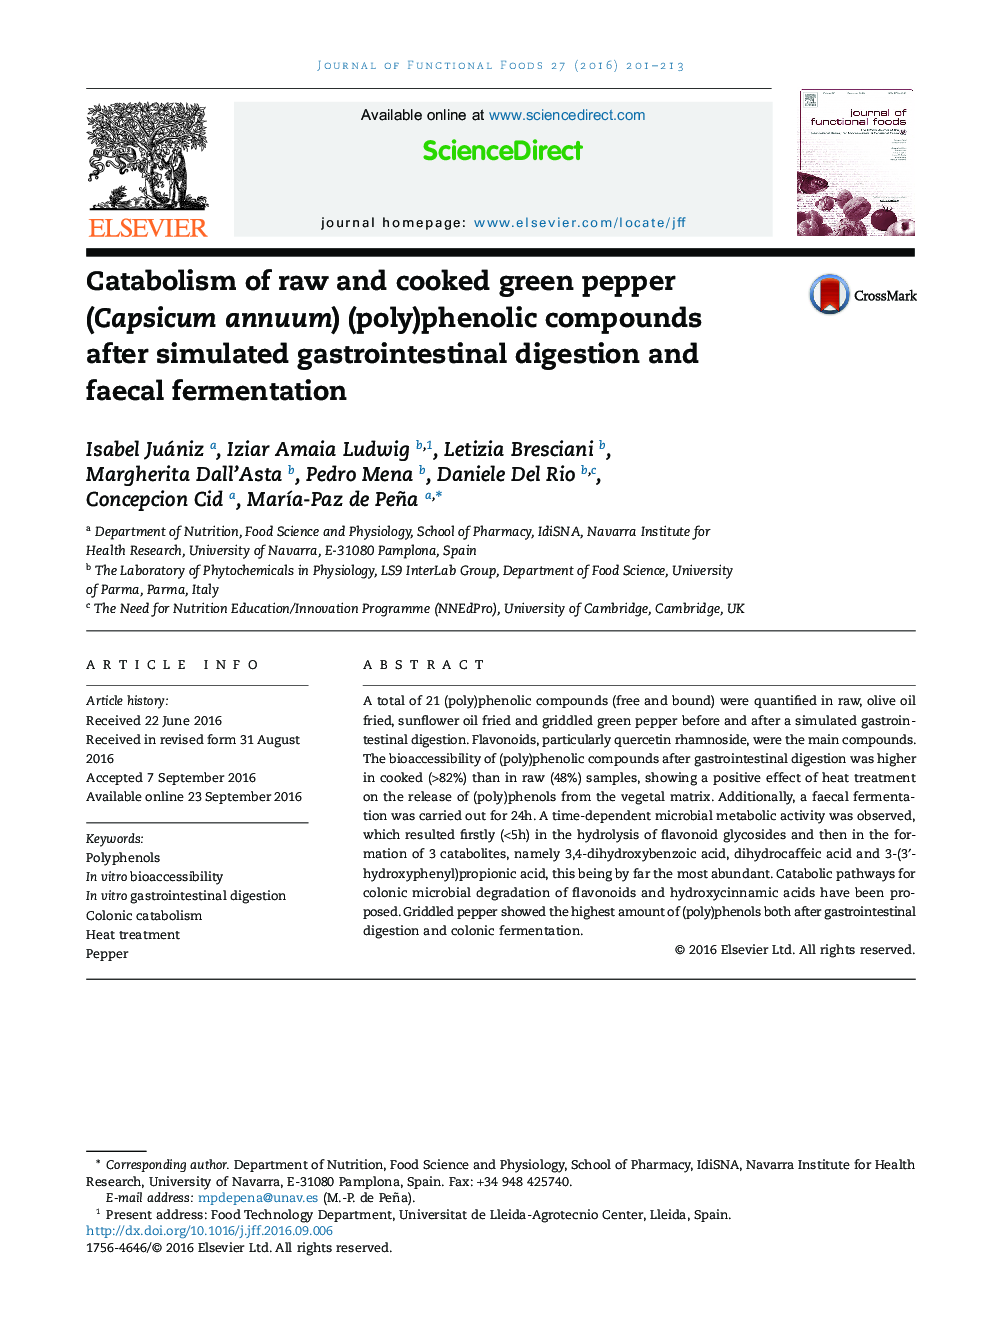 Catabolism of raw and cooked green pepper (Capsicum annuum) (poly)phenolic compounds after simulated gastrointestinal digestion and faecal fermentation